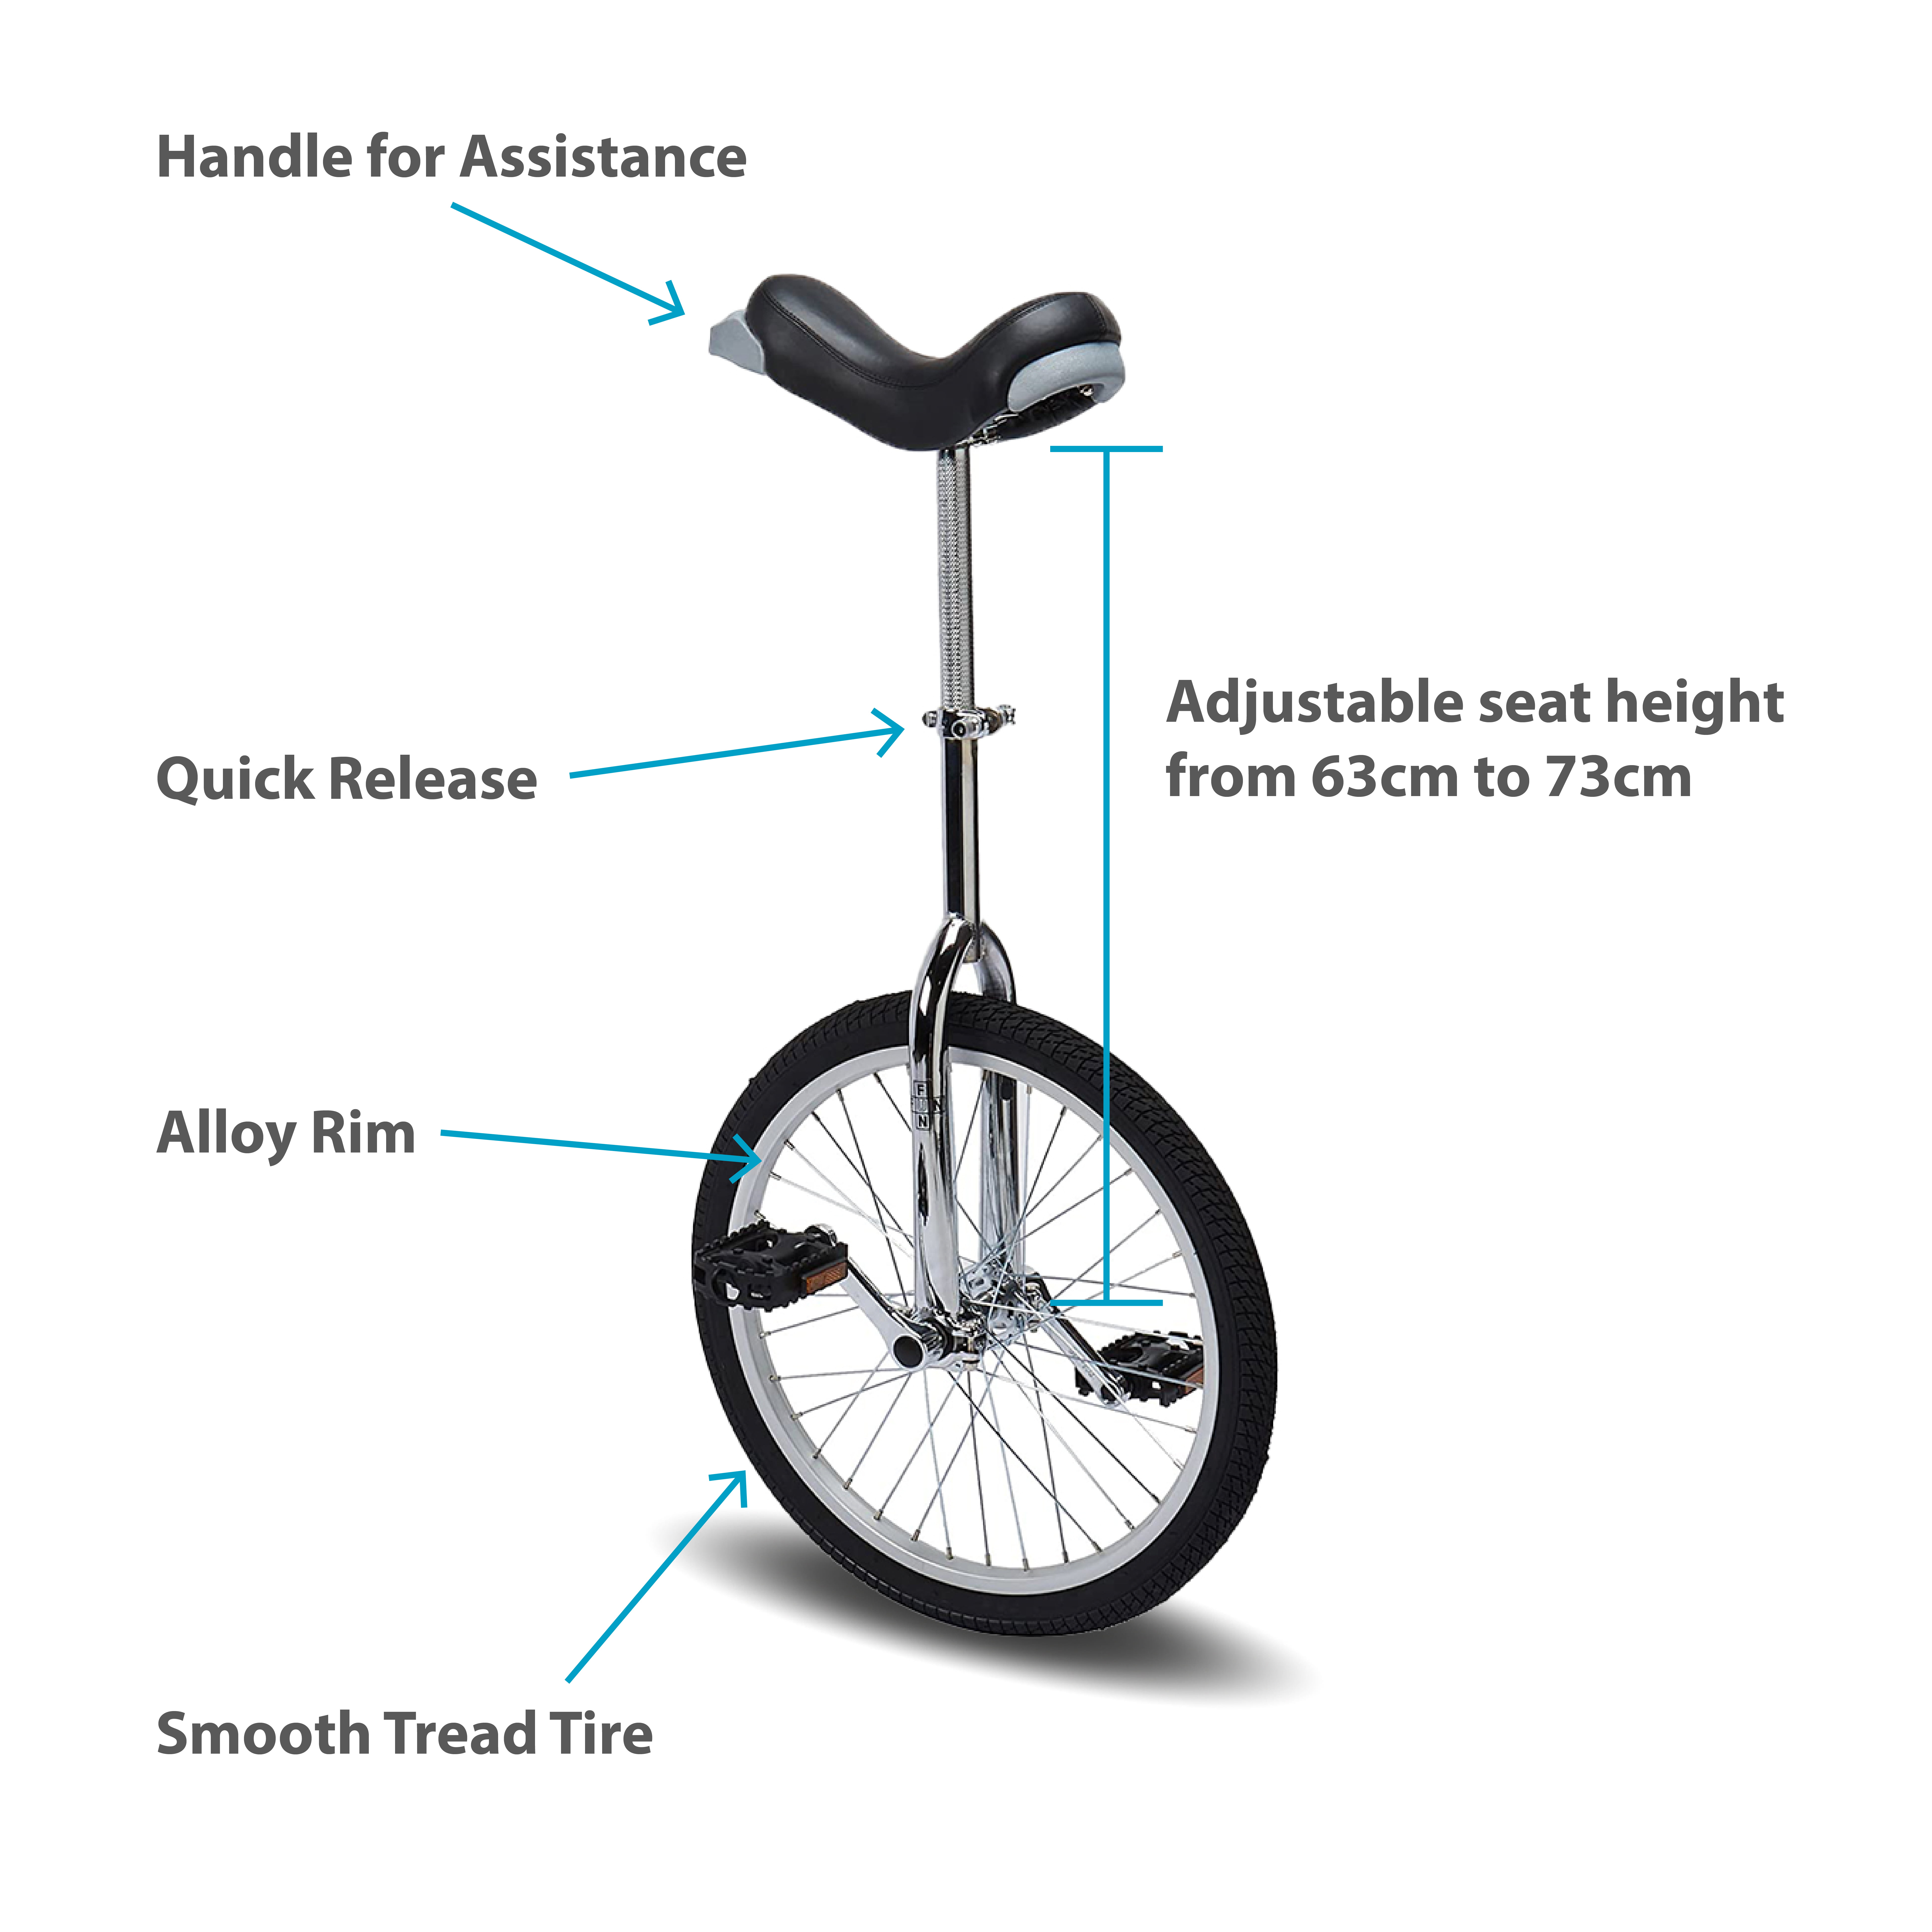 Chrome Unicycle,20 Tire Classic Chrome Unicycle Wheel Cycling Bike Mountain with Comfortable Release Saddle Seat US Ship for Exercise Balance Fitness Outdoor 